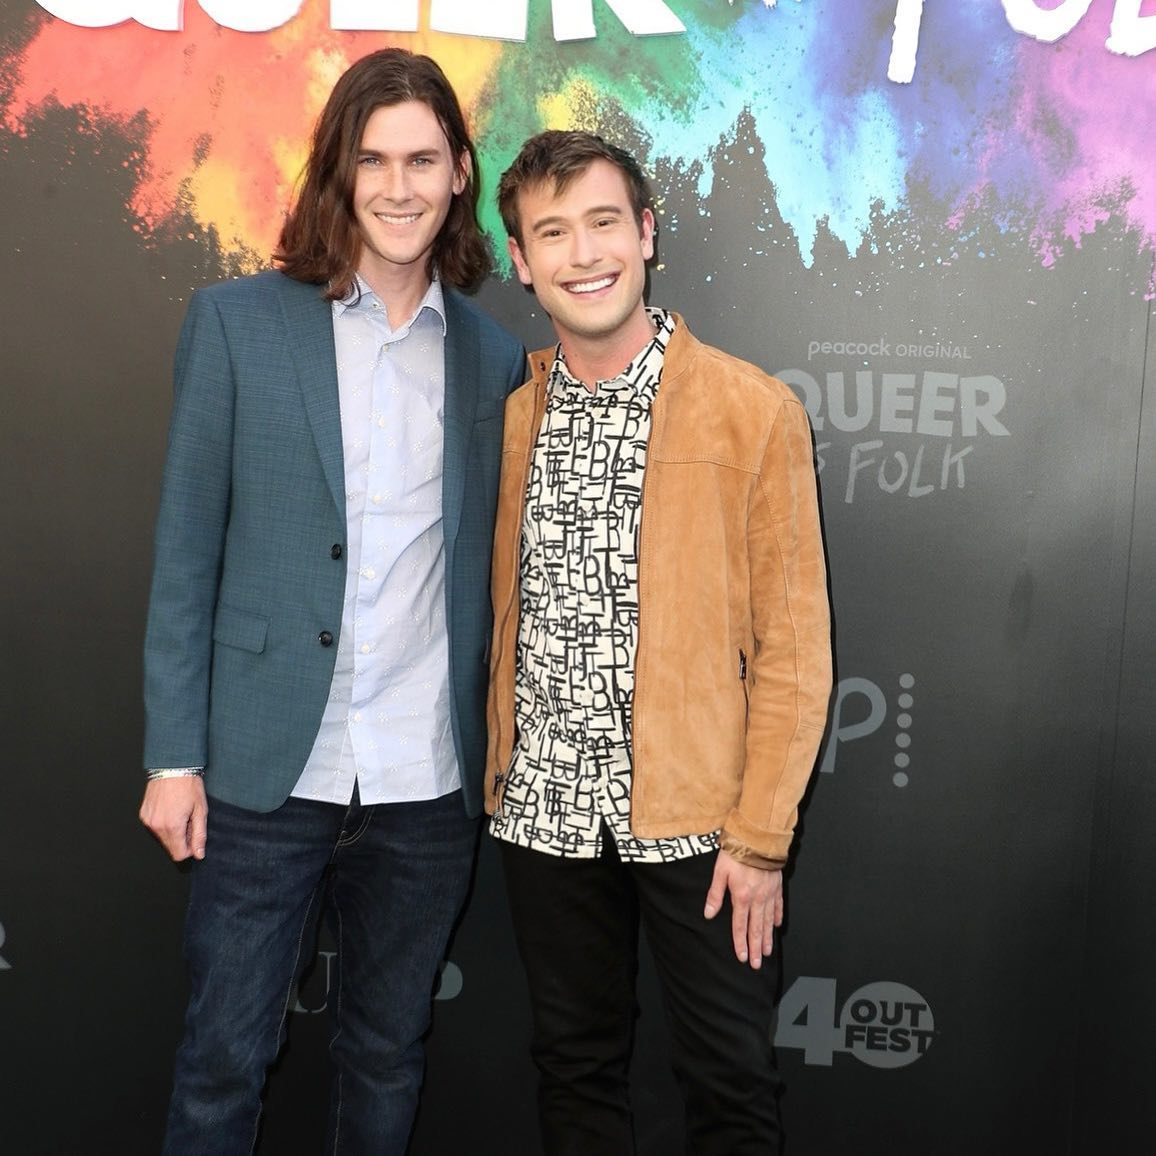 Tyler Henry and his boyfriend Clint at the Queer as Folk premiere